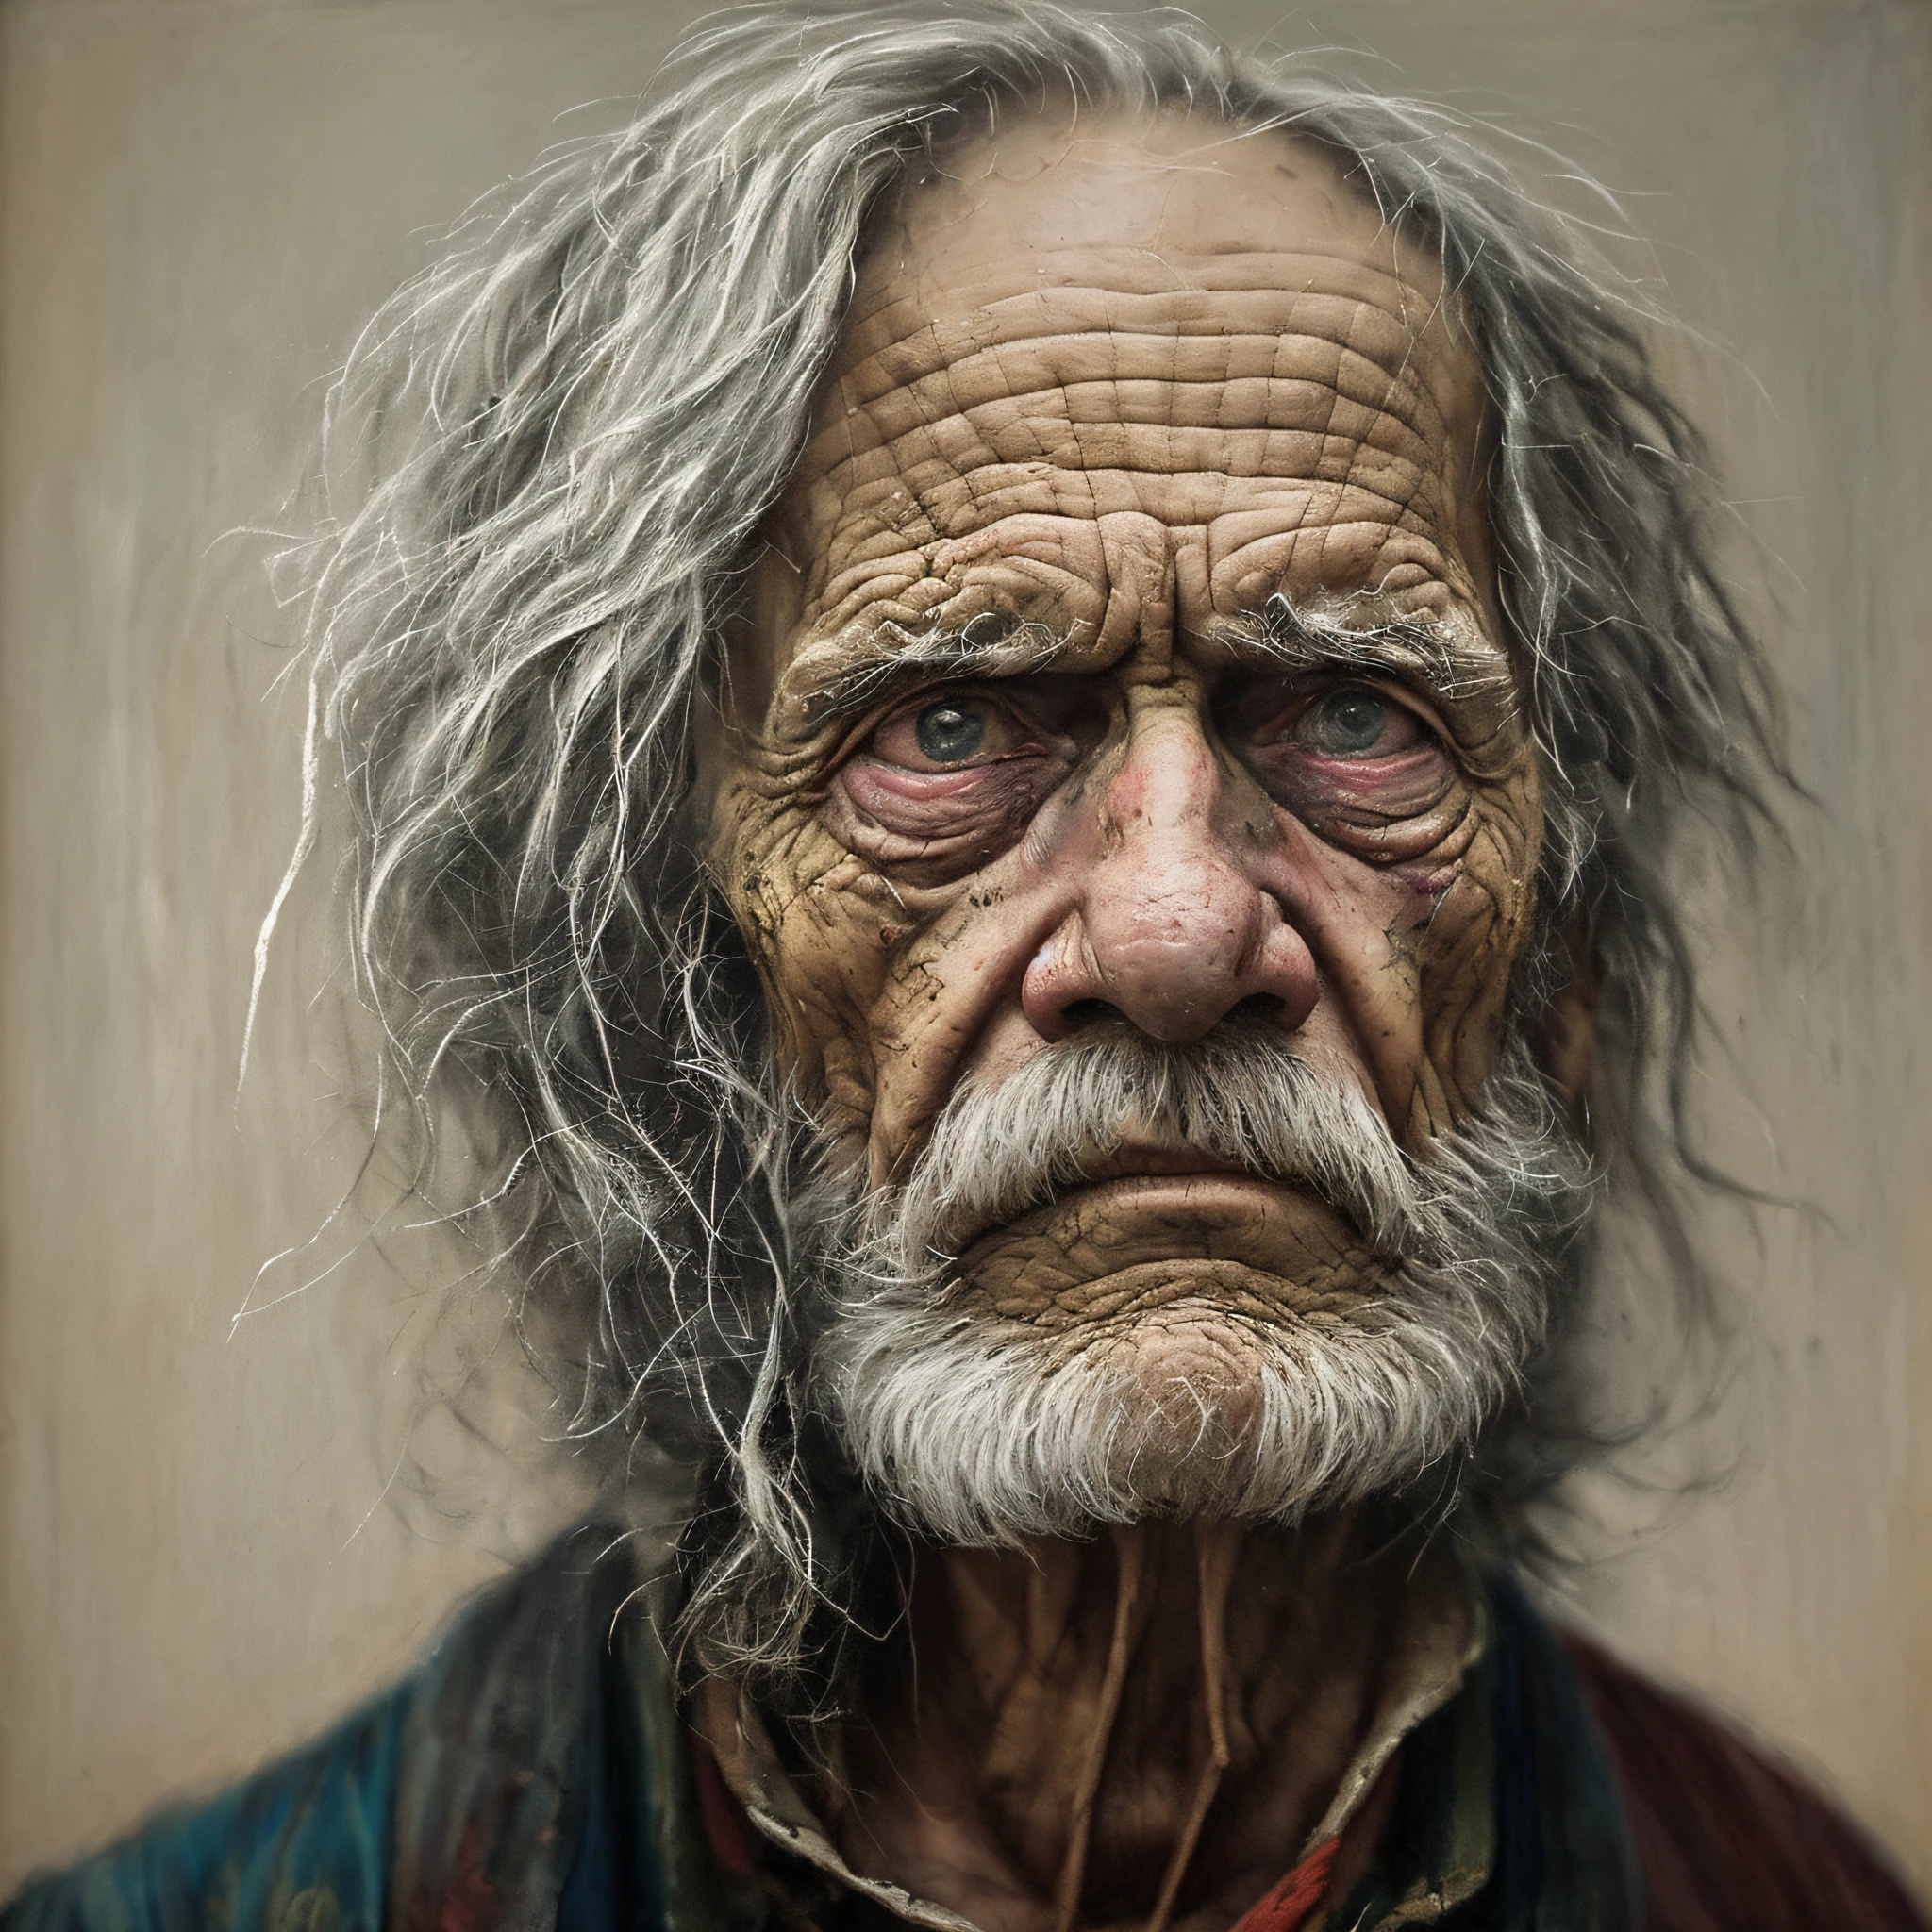 A portrait of poor american soldier 1800 old in rags, ((overwhelming fatigue )), wrinkles of age, concept art, oil pastel painting , moody gray colors , gritty, messy stylestyle of Alexey Savrasov, Ivan Shishkin, Ilya Repin, (cel shaded:1.2), 2d, (oil painting:1.2) highly detailed